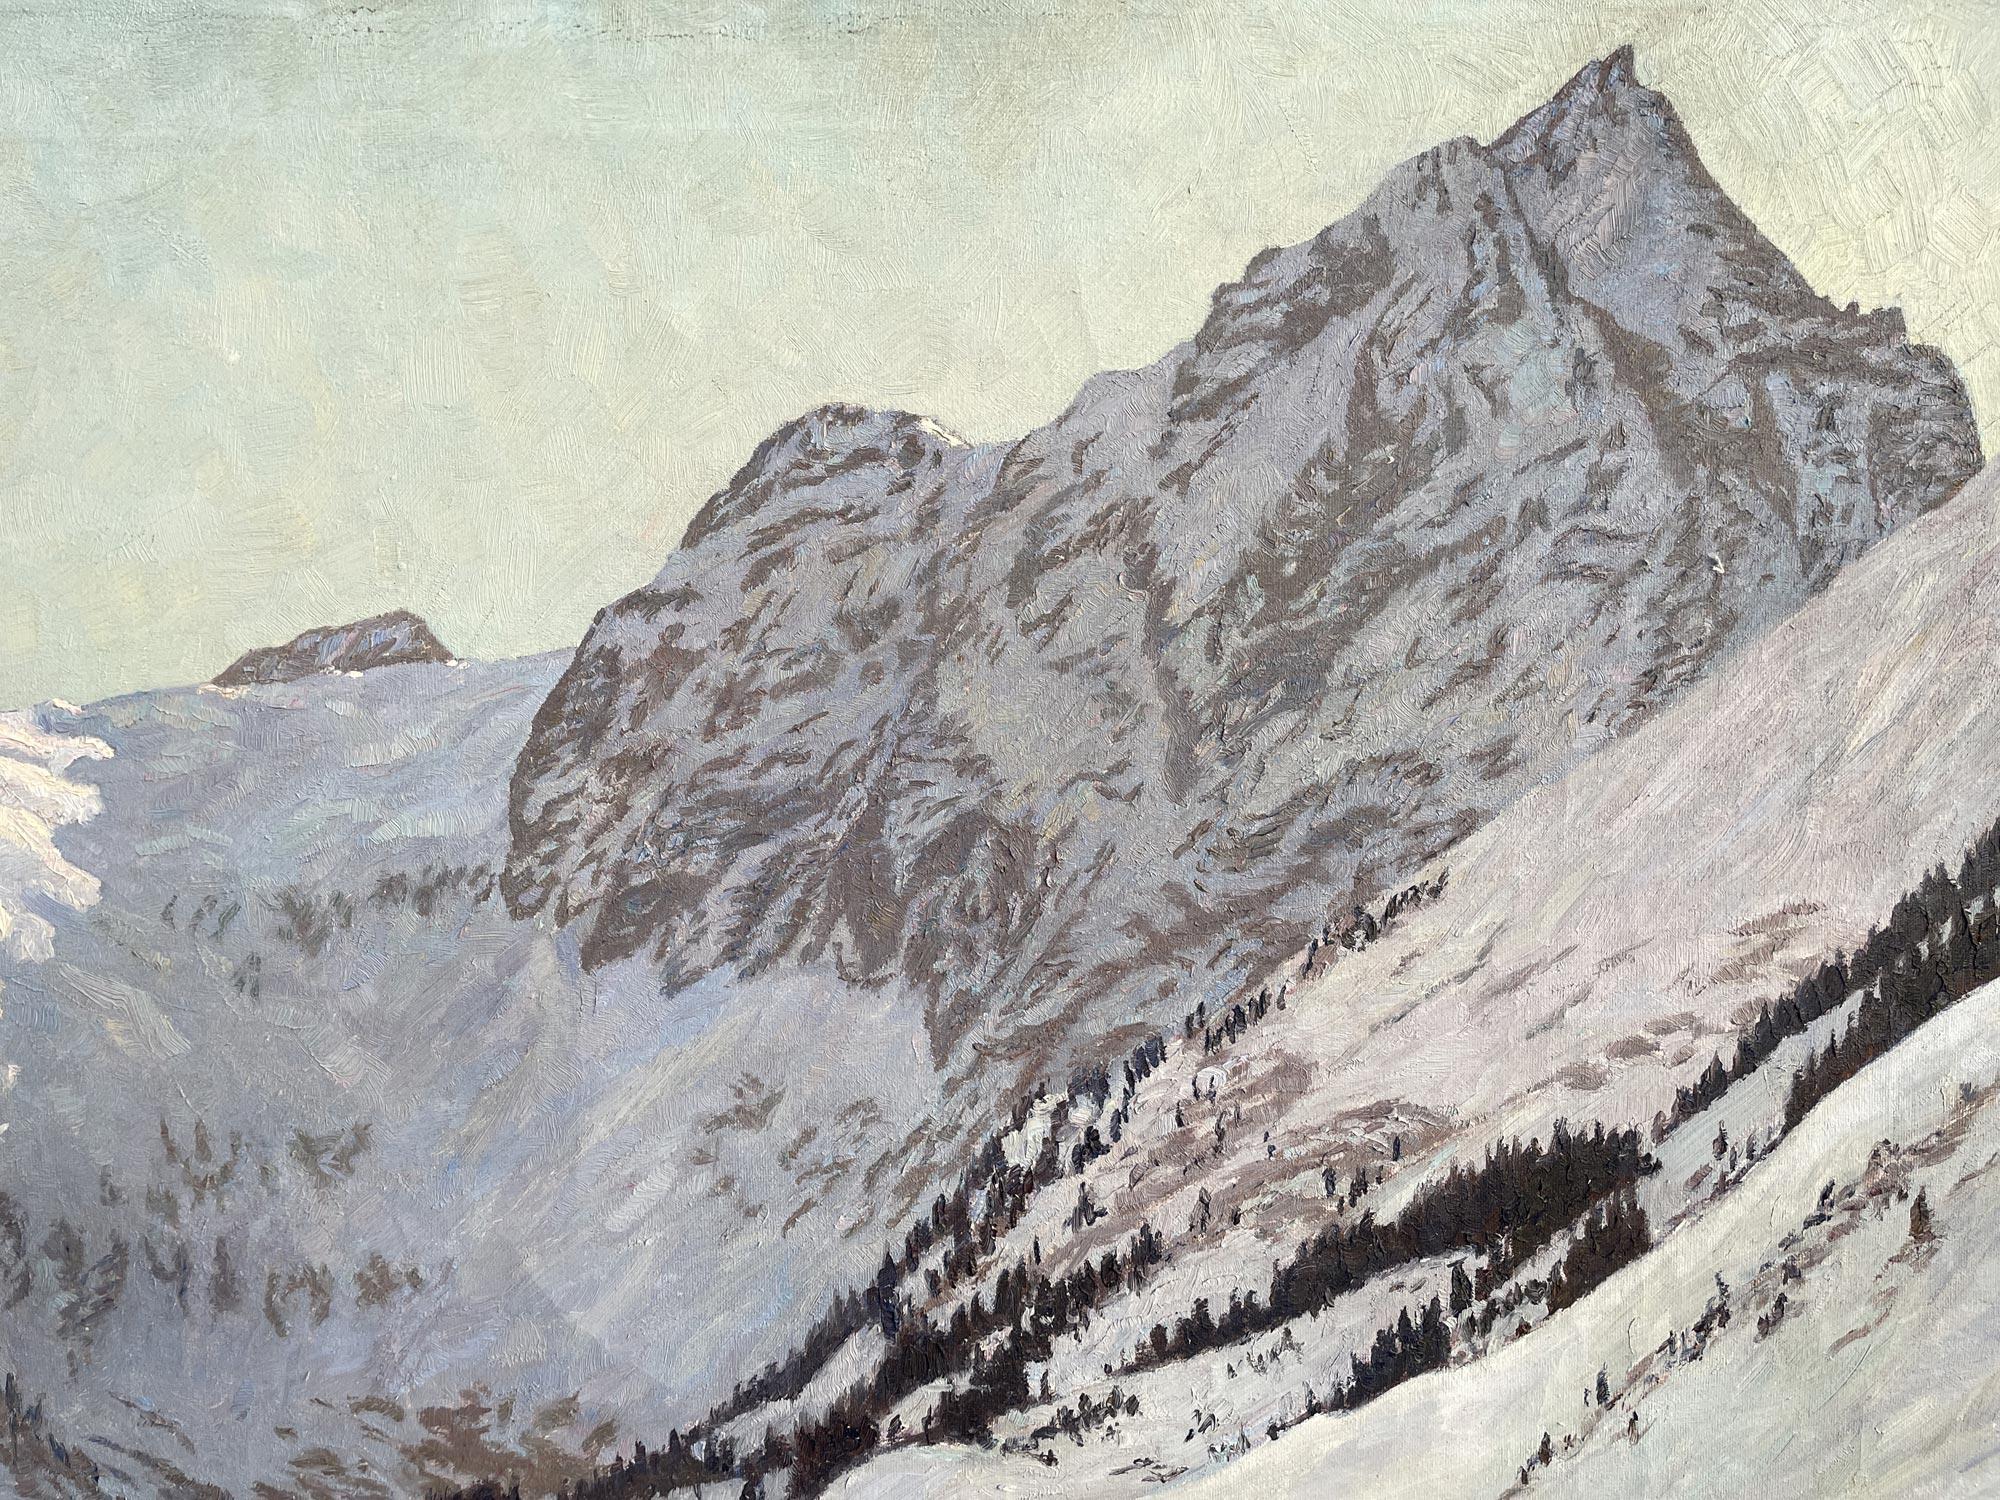 Oiled Snowy Landscape Oil On Canvas by Alex Weise - Dolomites 1930 For Sale